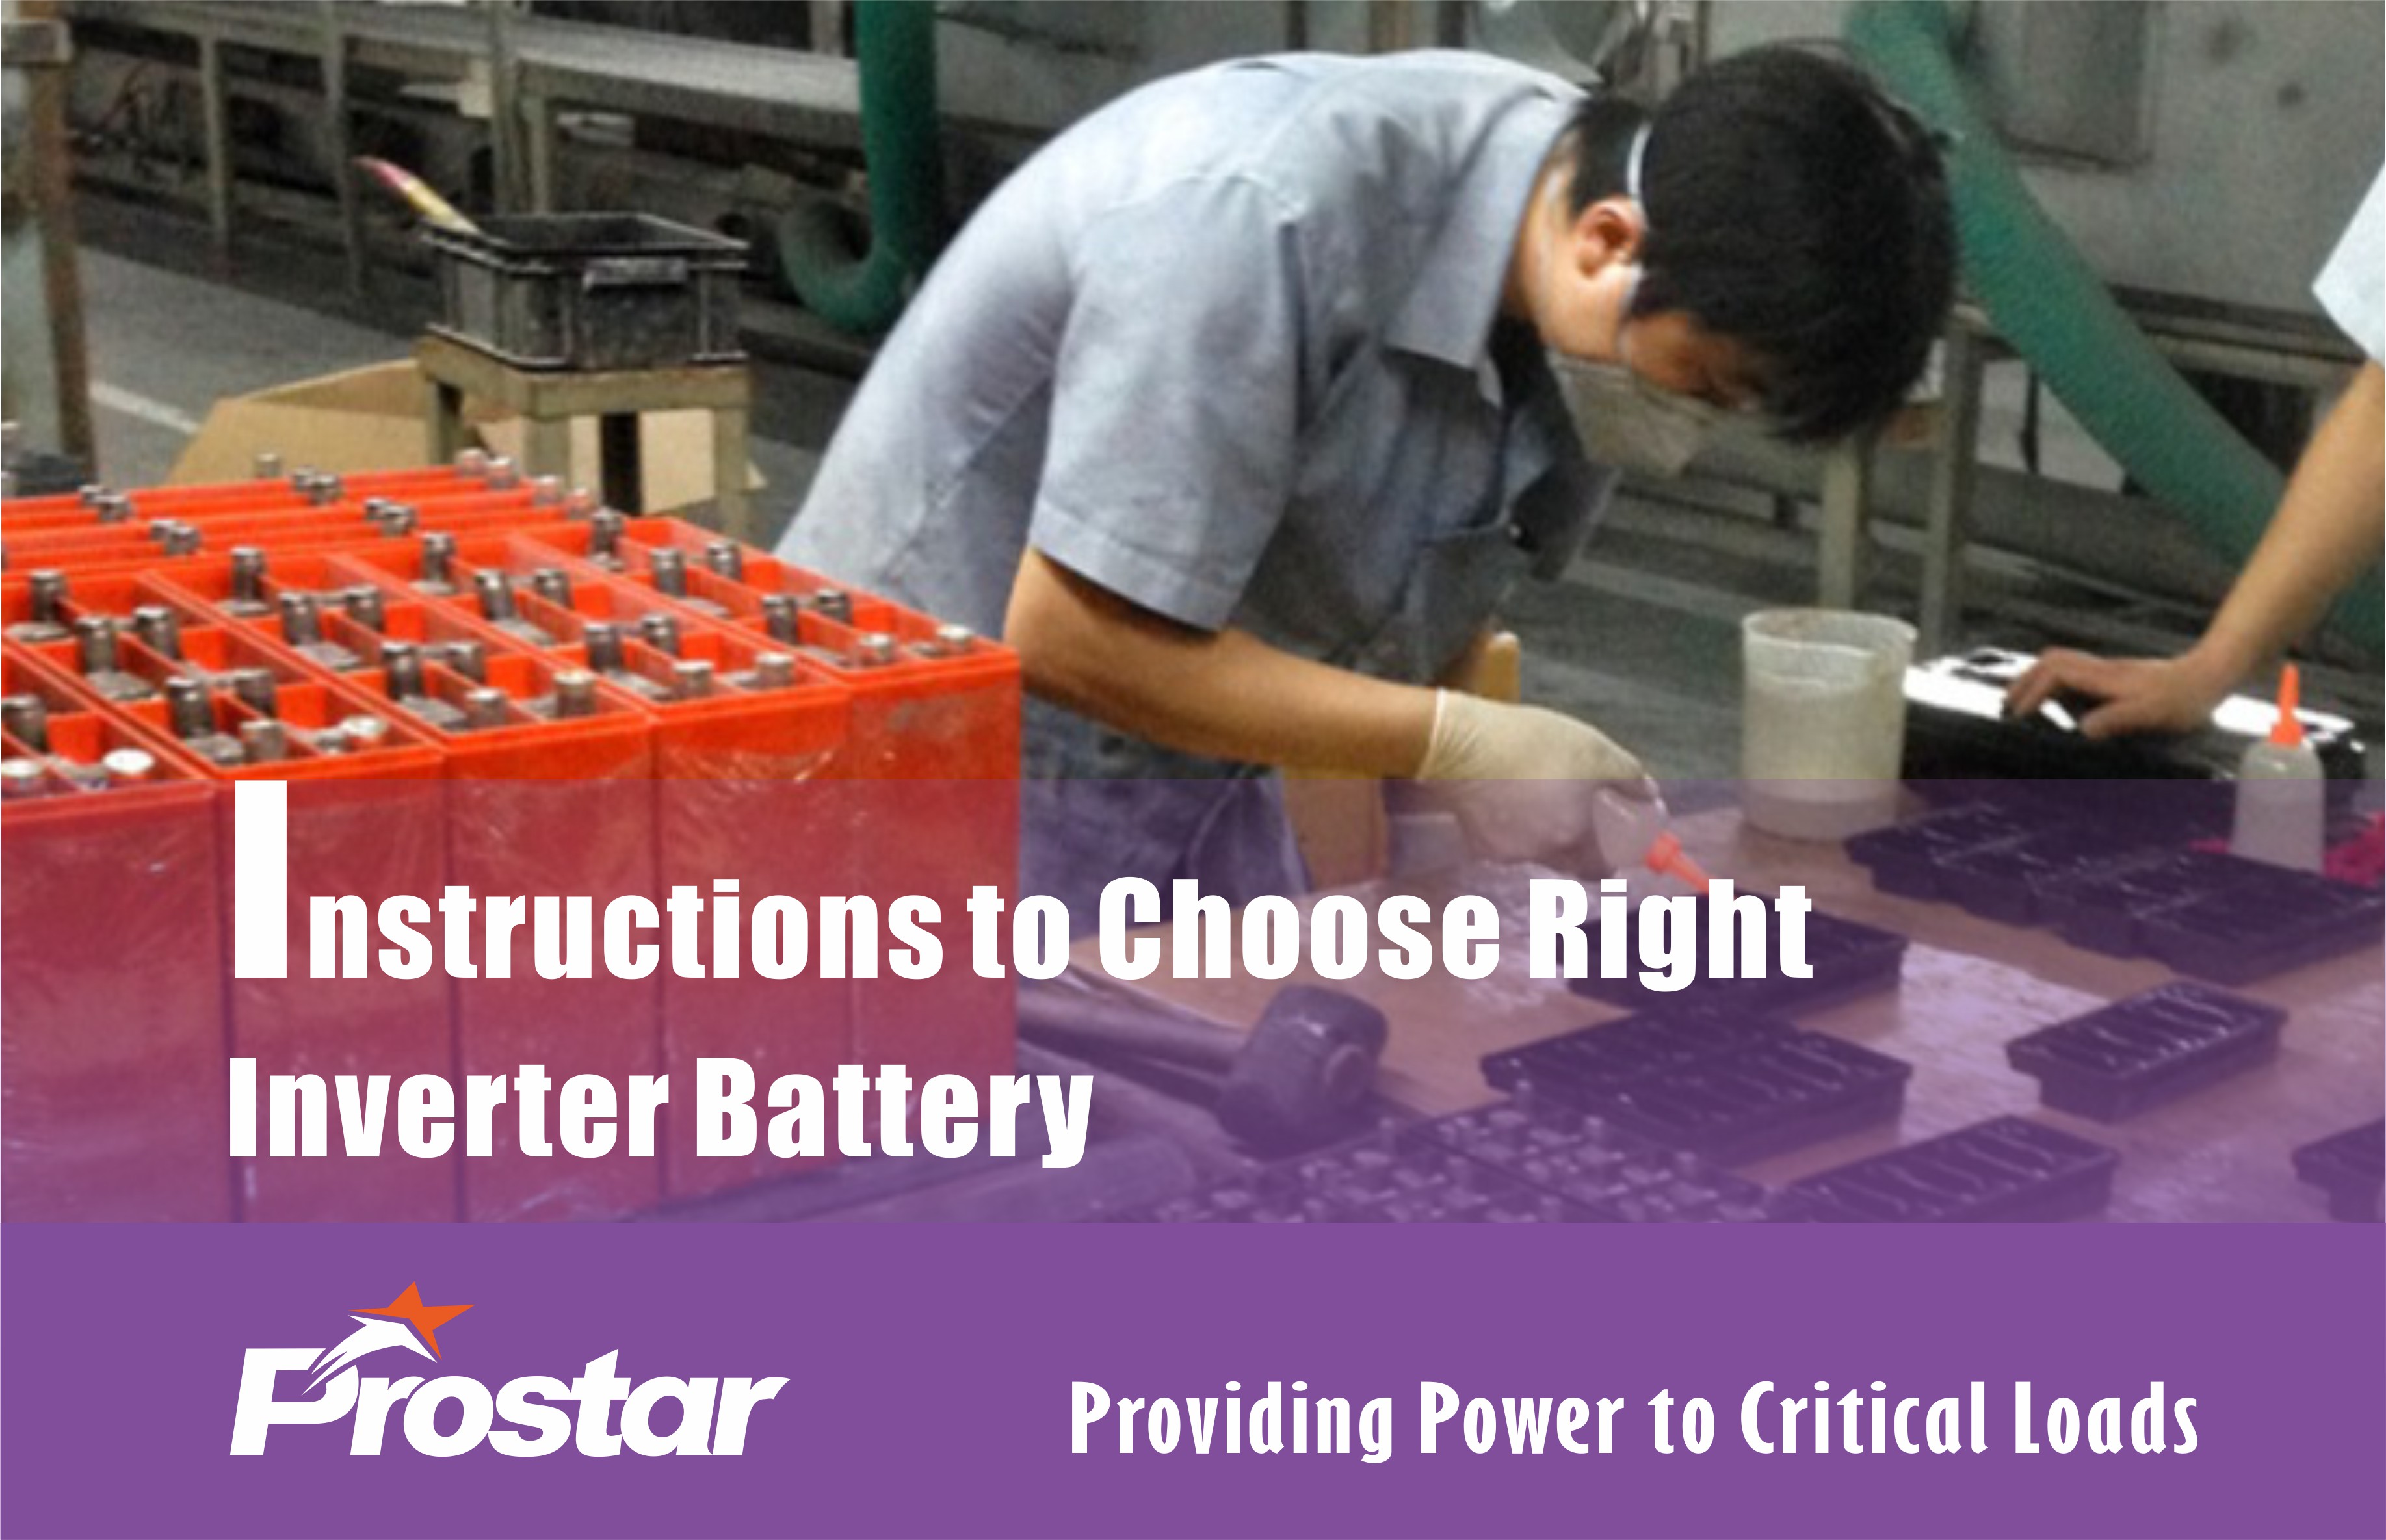 Instructions to Choose Right Inverter Battery